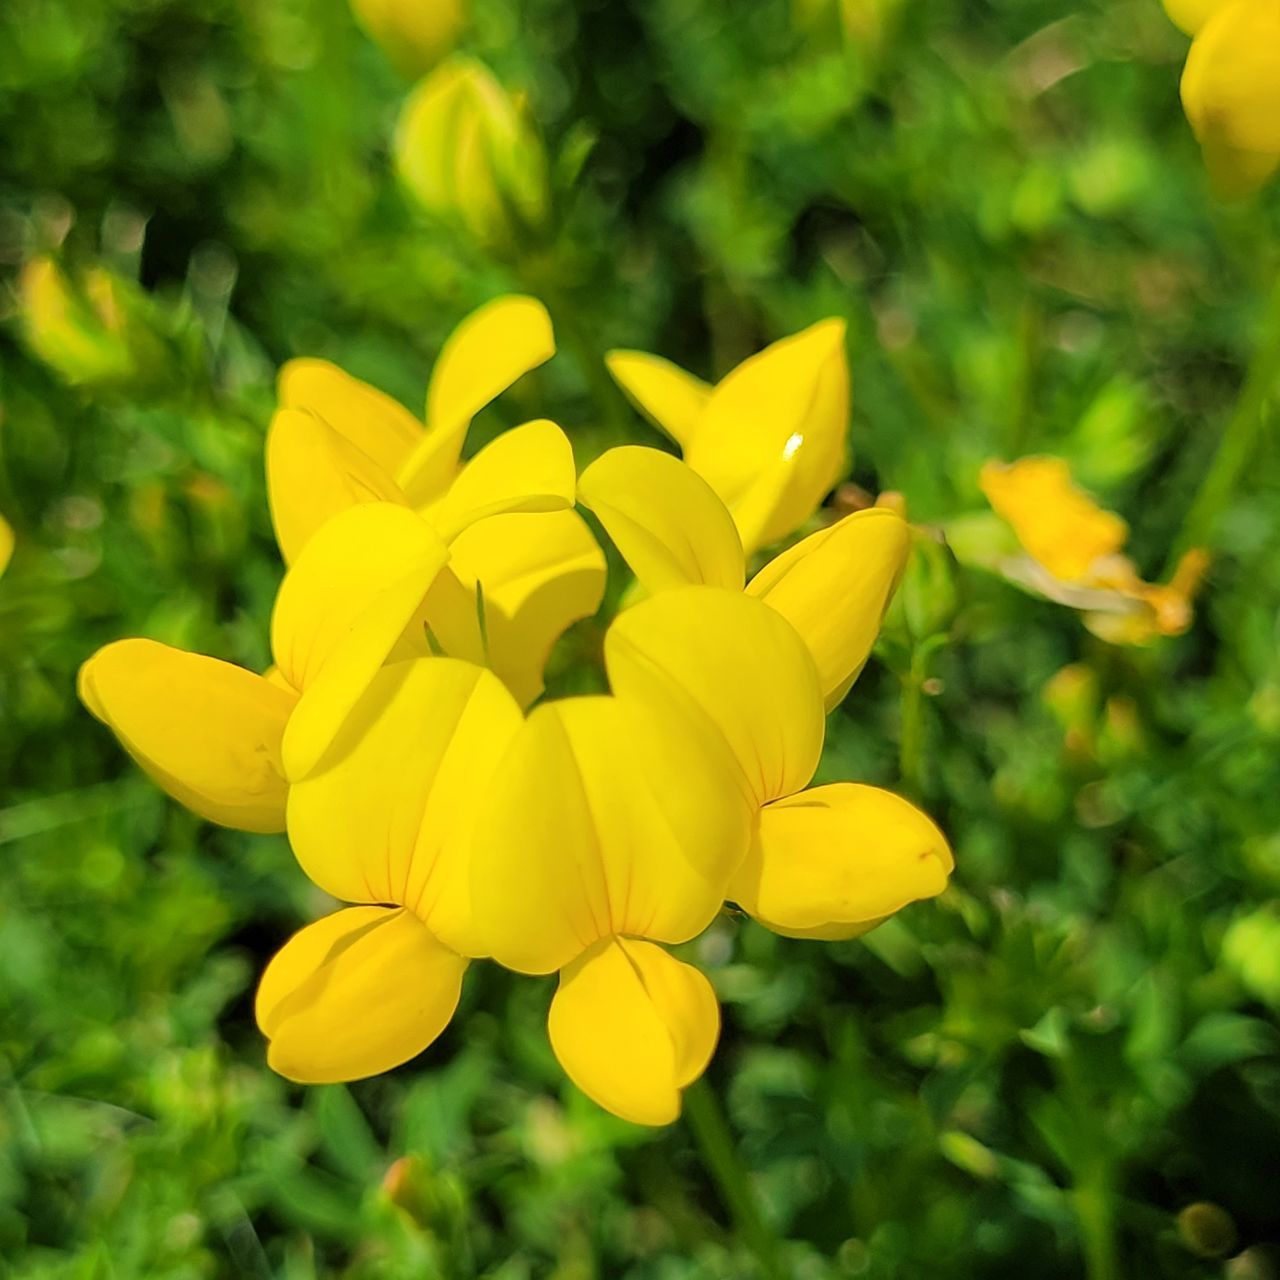 yellow, plant, flower, flowering plant, freshness, beauty in nature, nature, close-up, flower head, growth, petal, wildflower, fragility, meadow, springtime, inflorescence, no people, focus on foreground, green, outdoors, vibrant color, macro photography, day, blossom, summer, garden